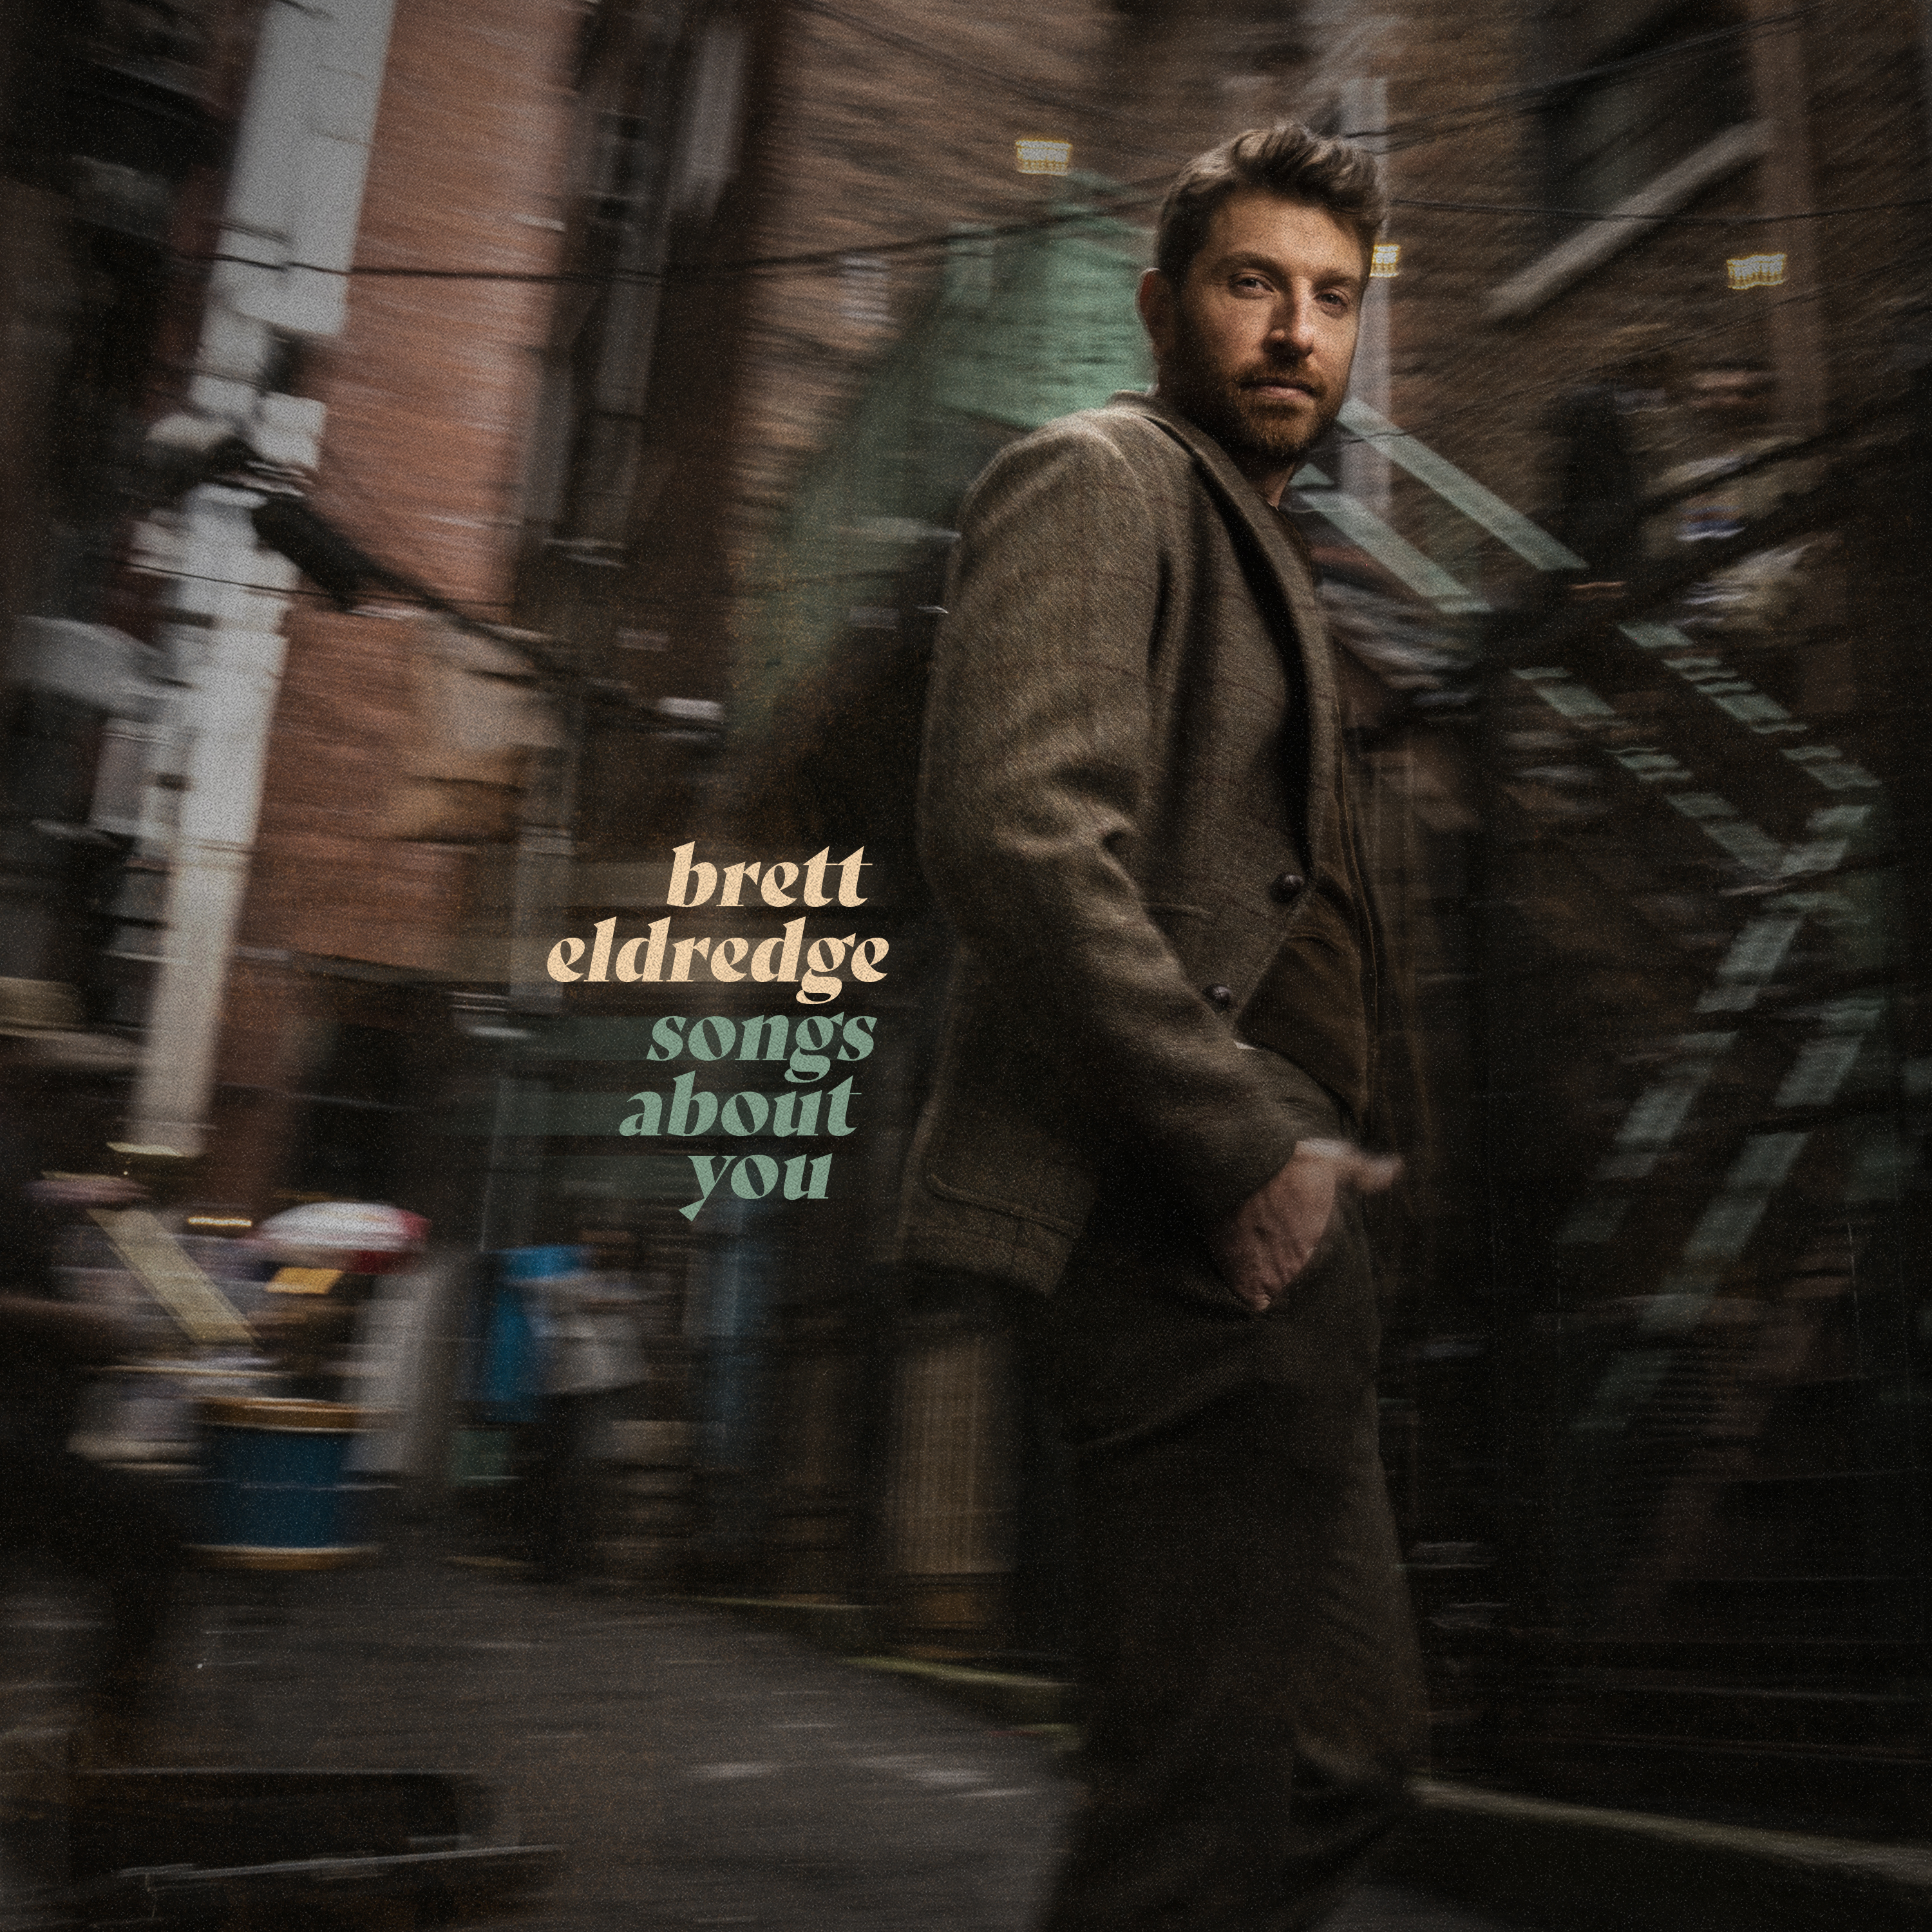 BRETT ELDREDGE’S NEW ALBUM SONGS ABOUT YOU DEBUTS TOMORROW WITH RAVE REVIEWS